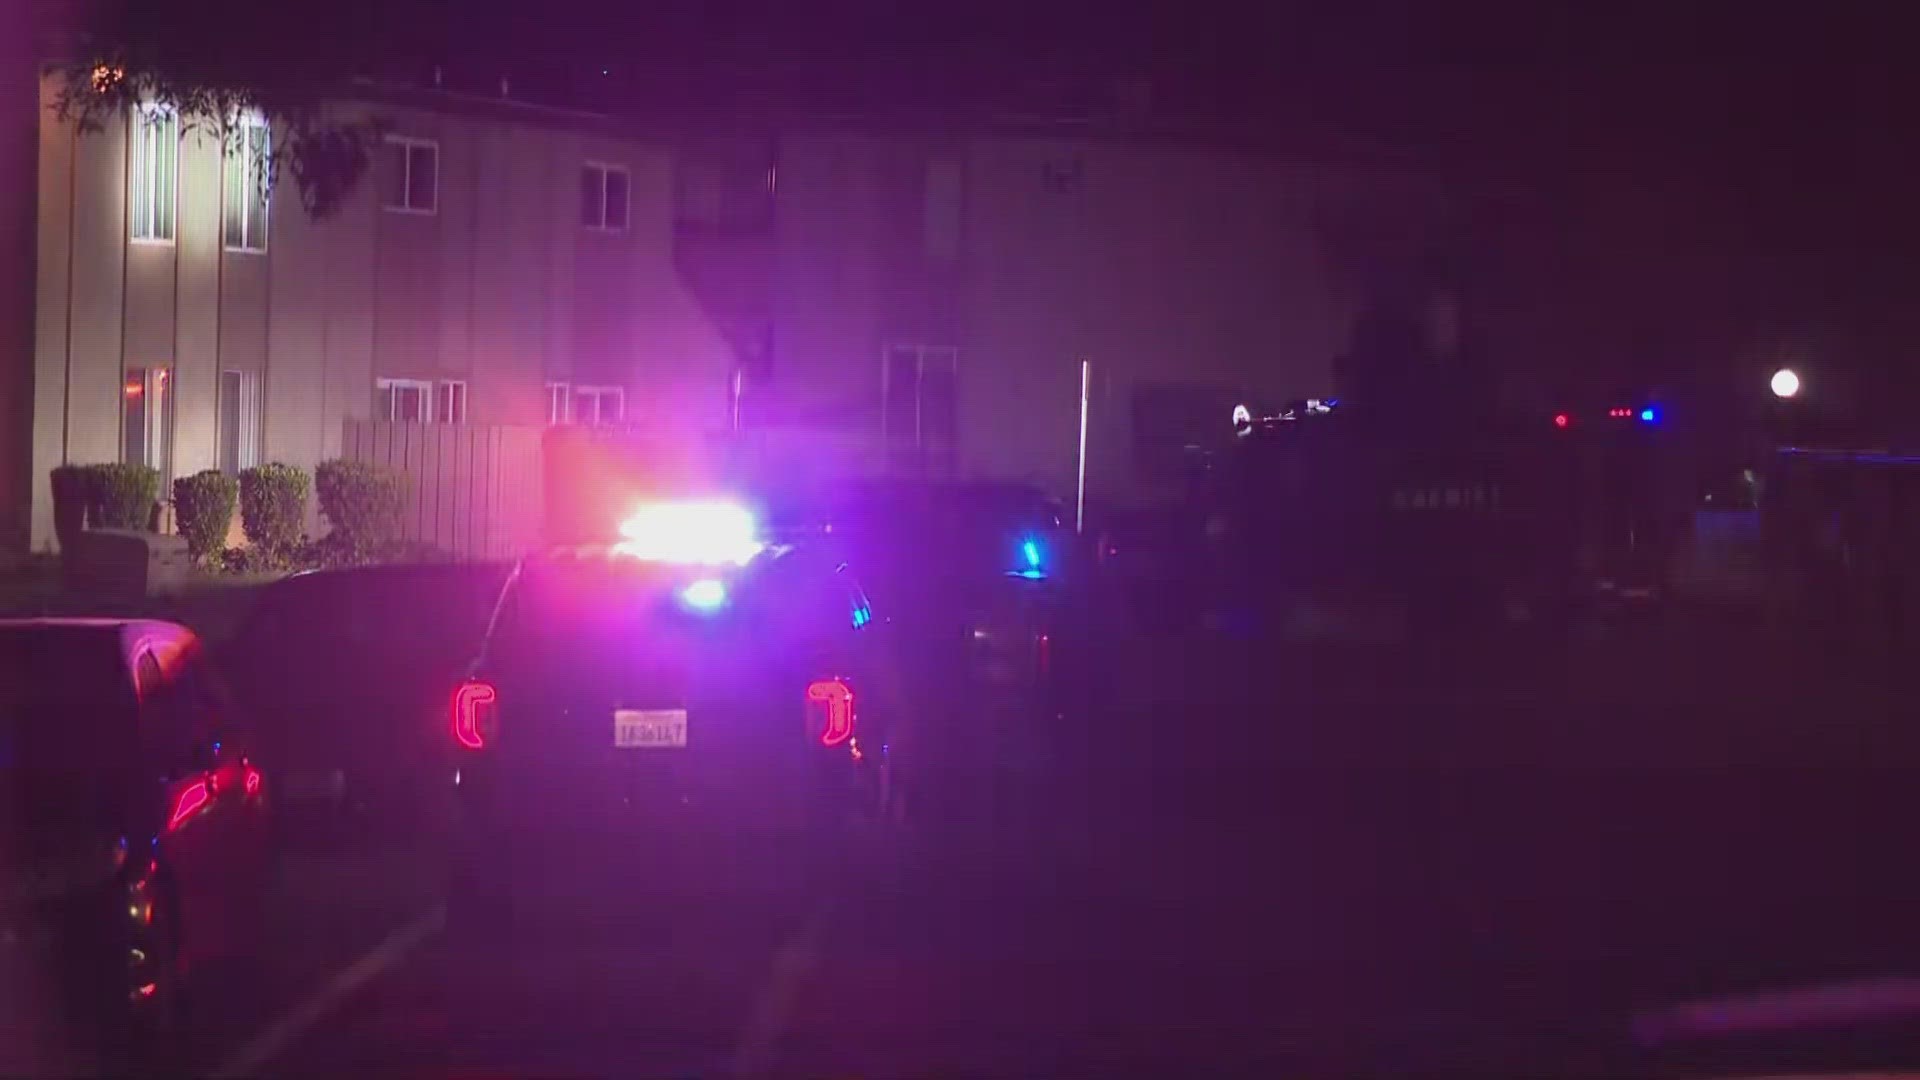 A seven-year-old child is expected survive after being stabbed in Rancho Cordova Tuesday evening, deputies said.